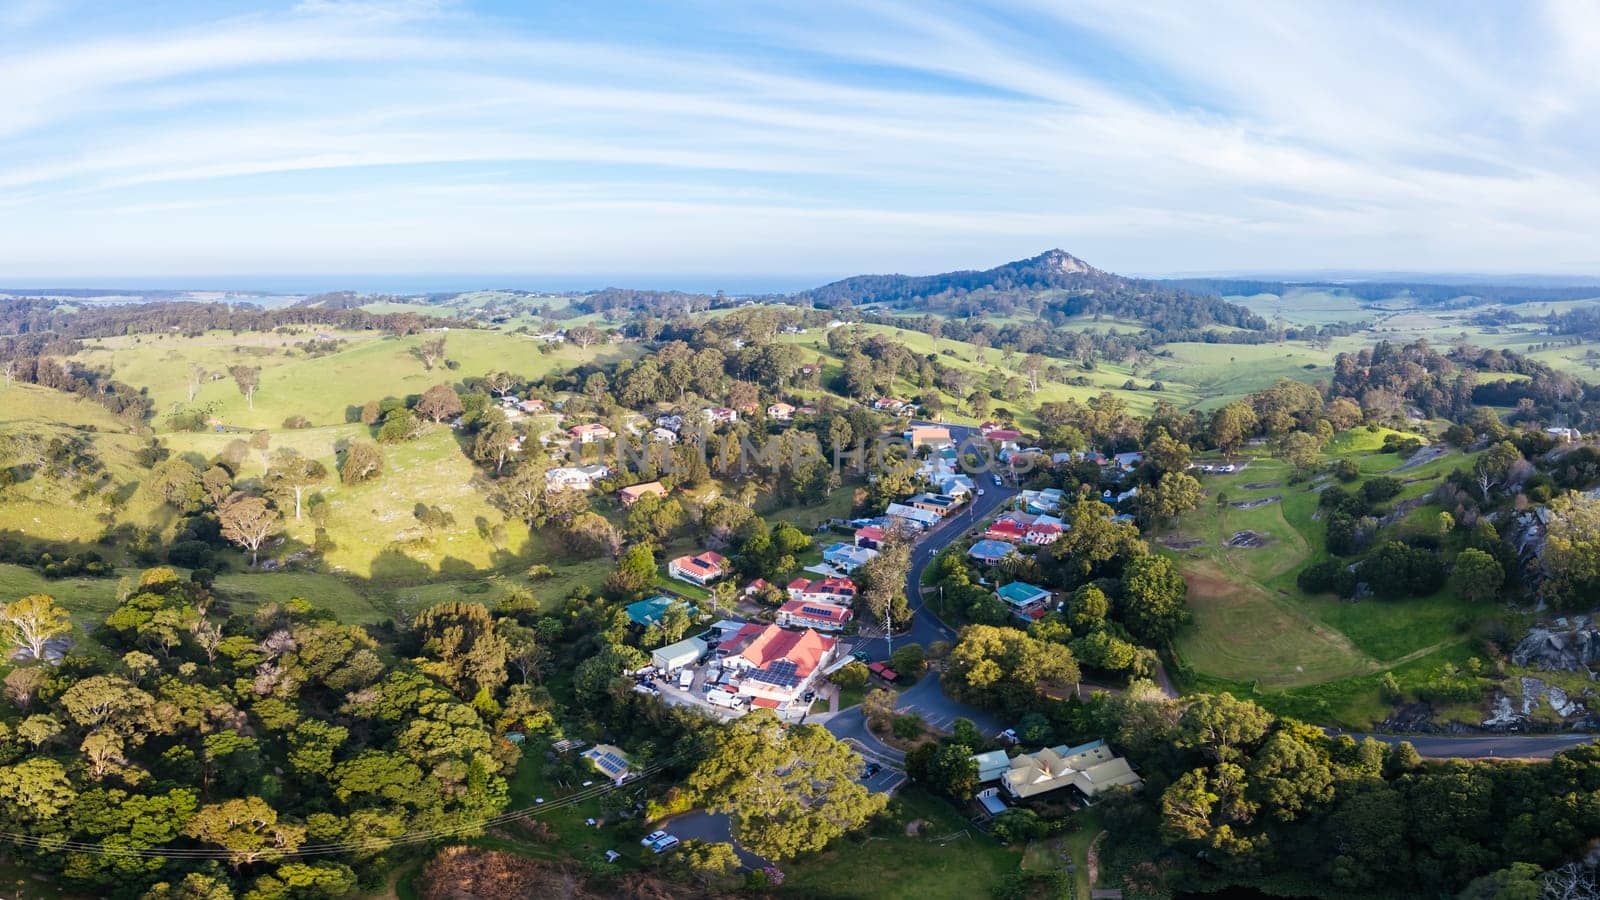 Aerial view over Central Tilba in its idyllic setting in New South Wales, Australia